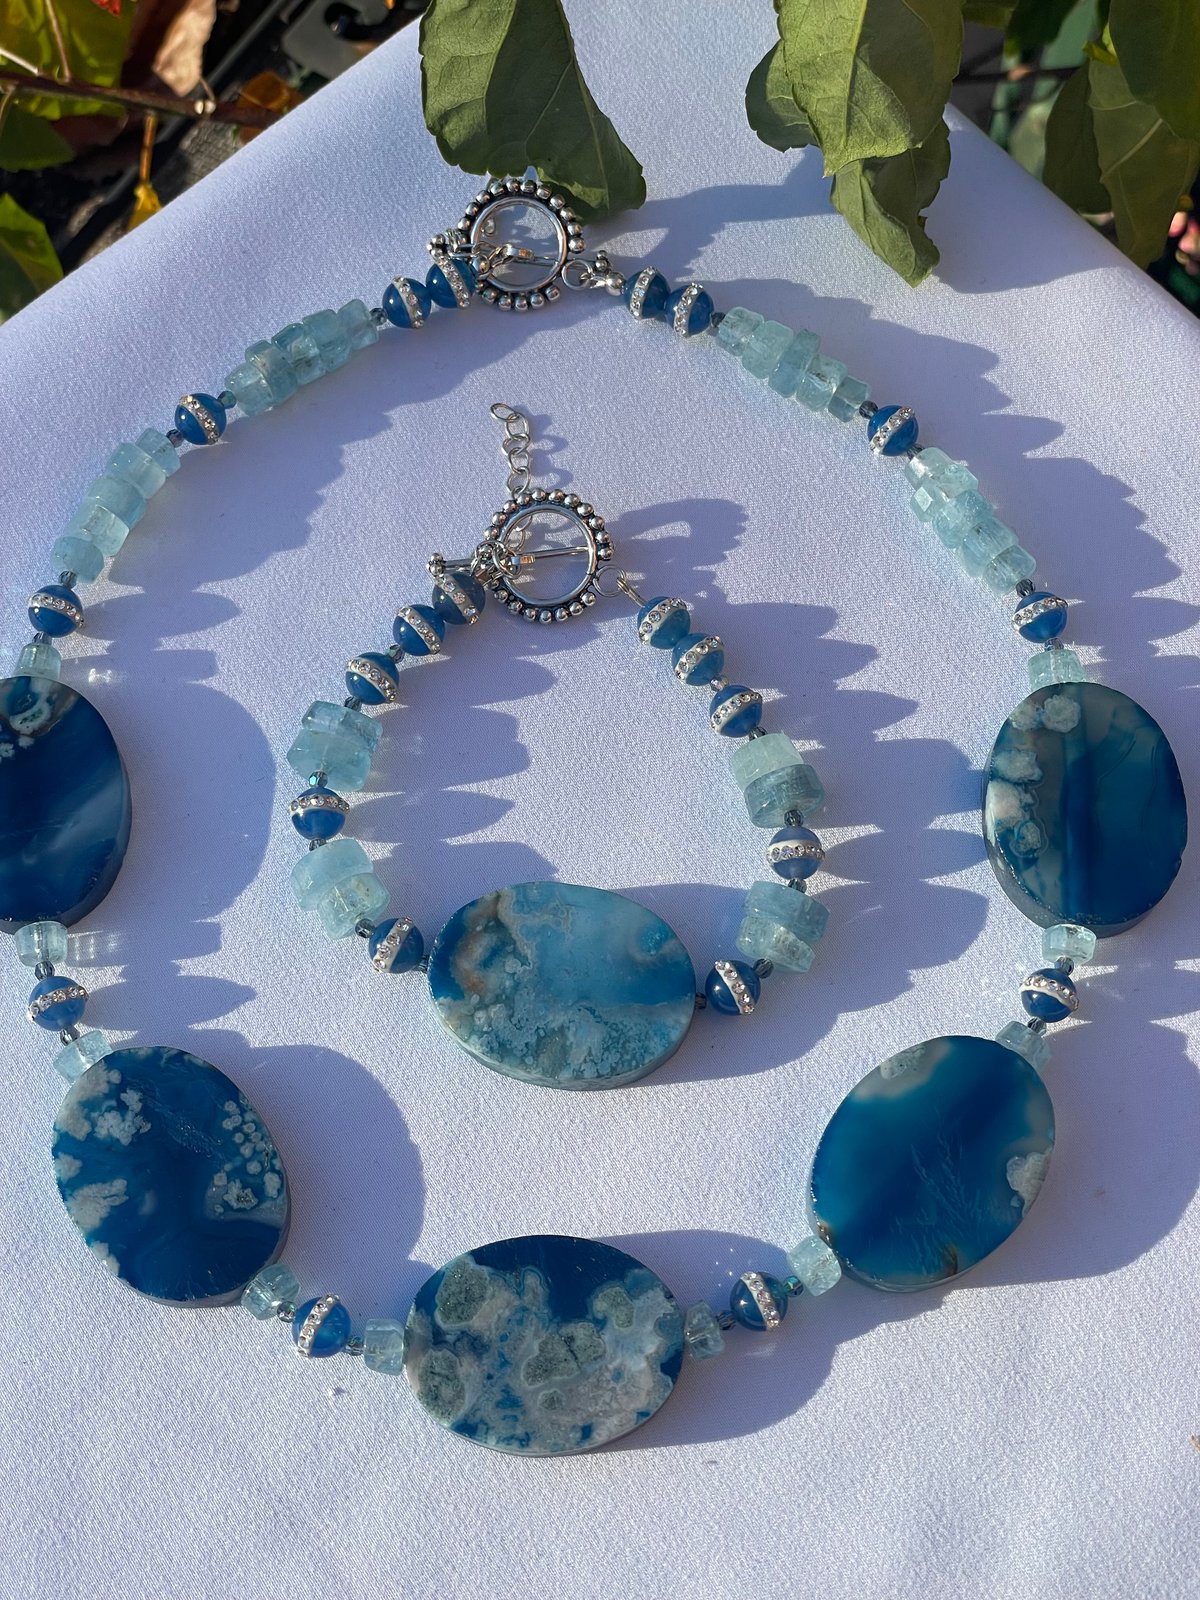 5 Stone Blue & Green Mixed Agate Necklace